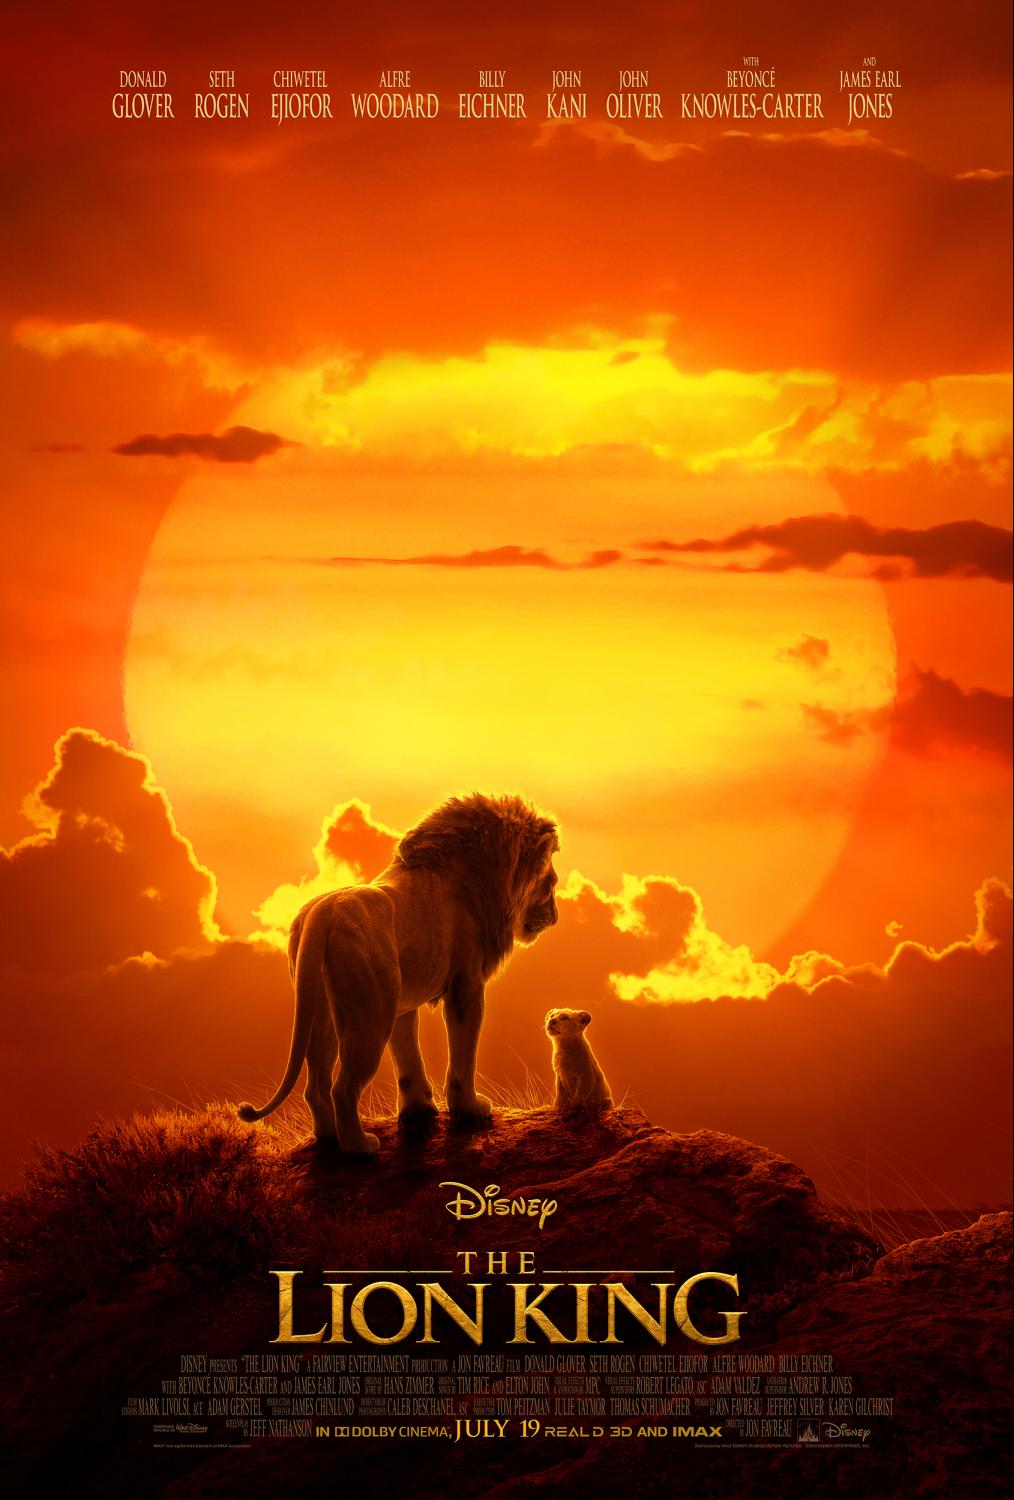 Check Out These Behind The Scenes Lion King Clips!